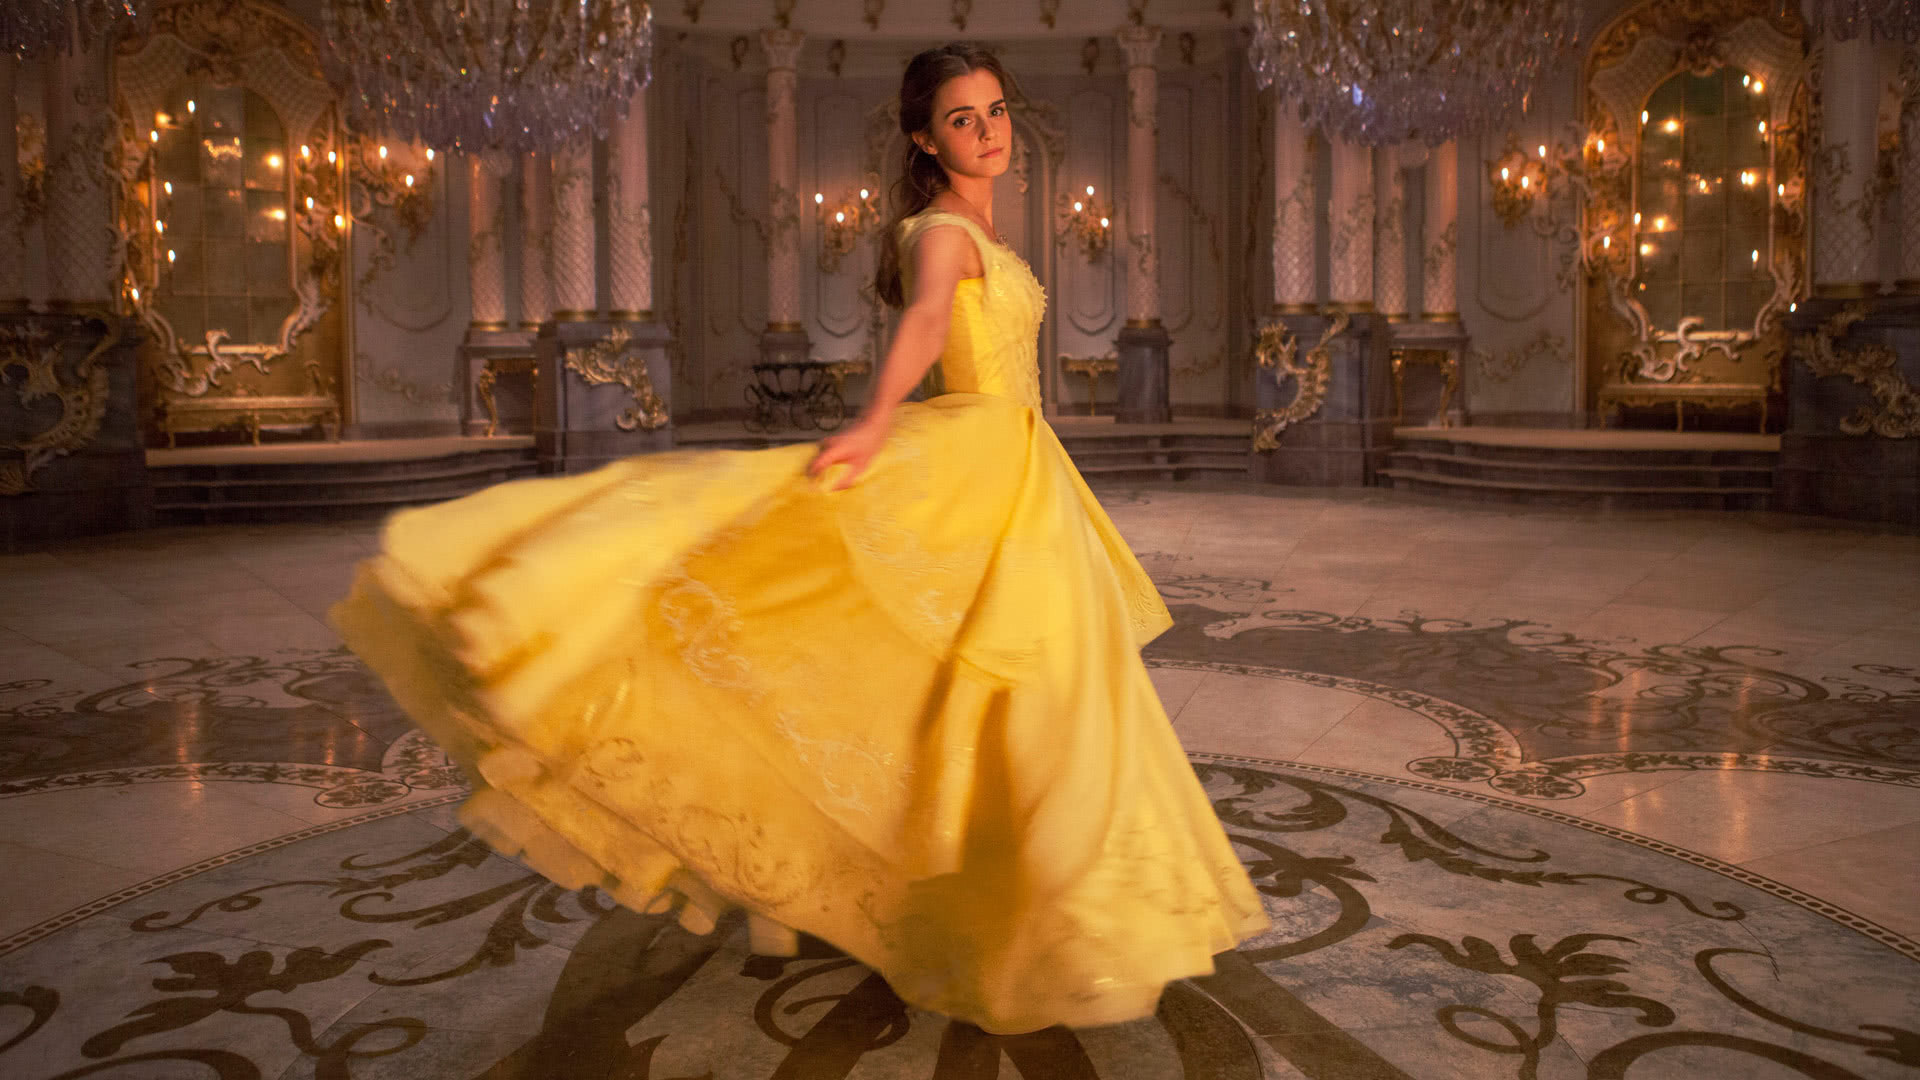 Beauty And The Beast 2017 Movies HD Wallpaper 07 Preview | 10wallpaper.com